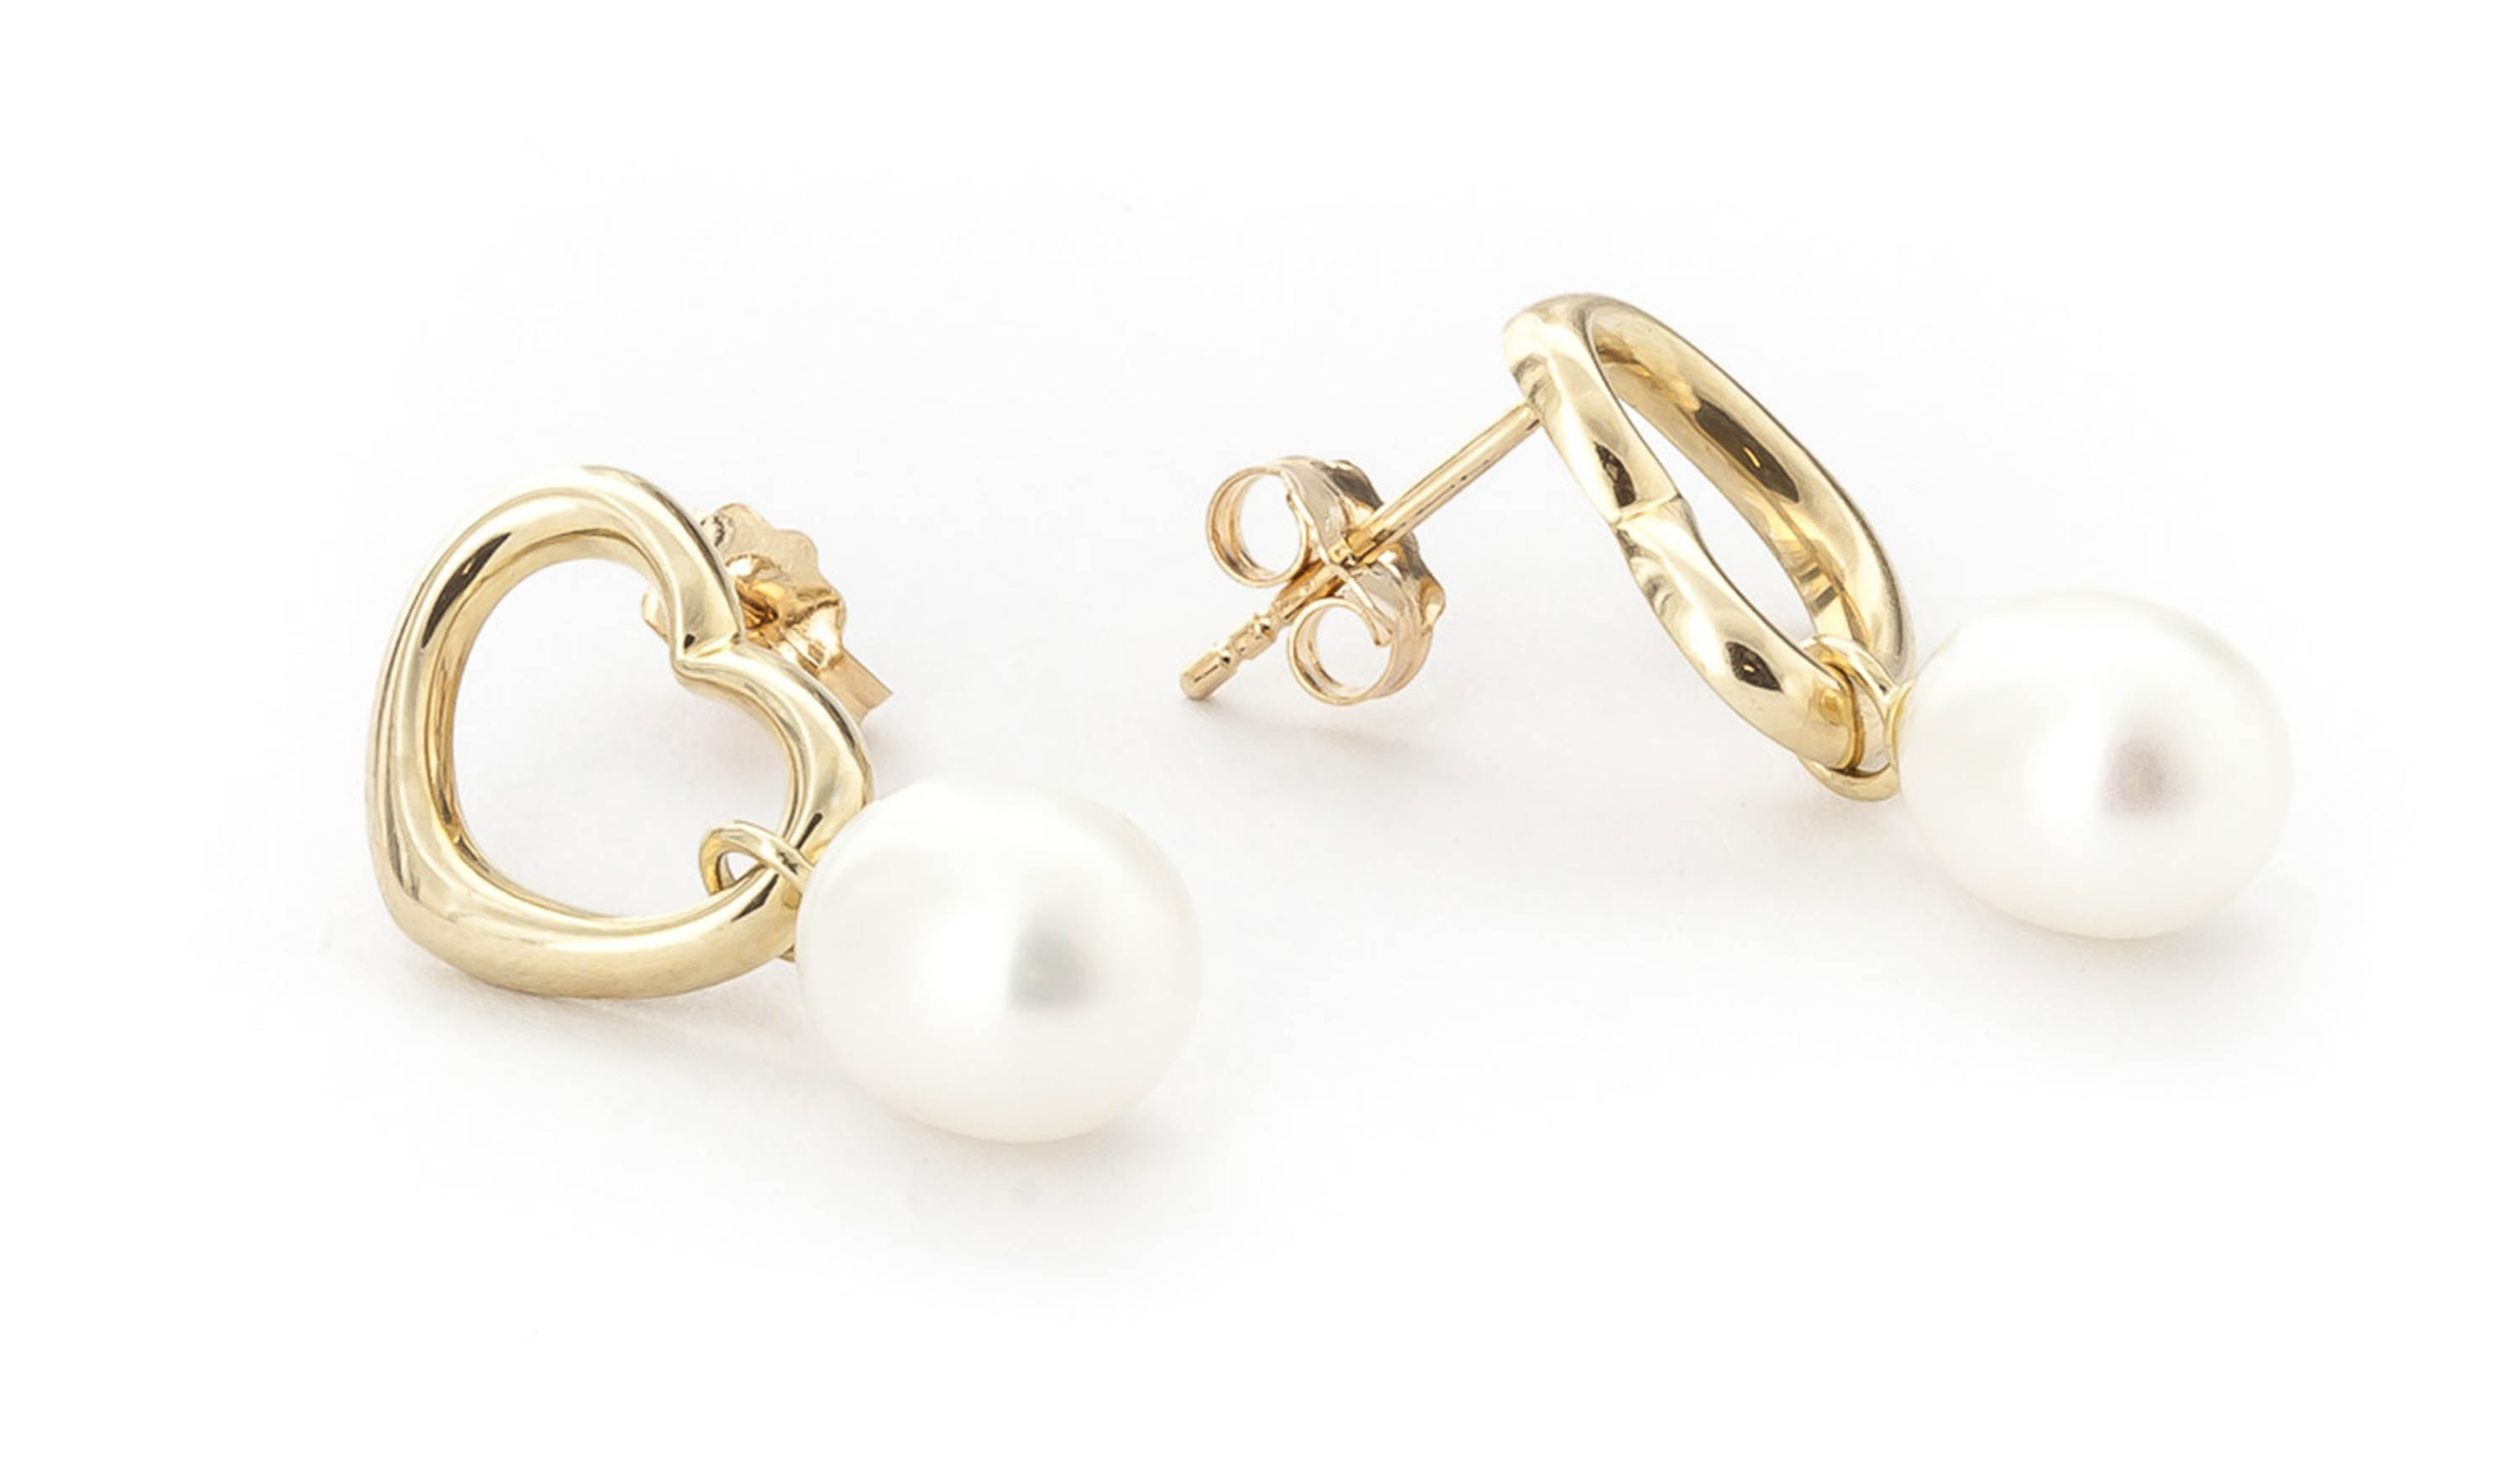 Galaxy Gold 8 Carat 14k Solid Gold Open Heart Stud Earrings with Dangling Freshwater-cultured Pearls - image 3 of 5